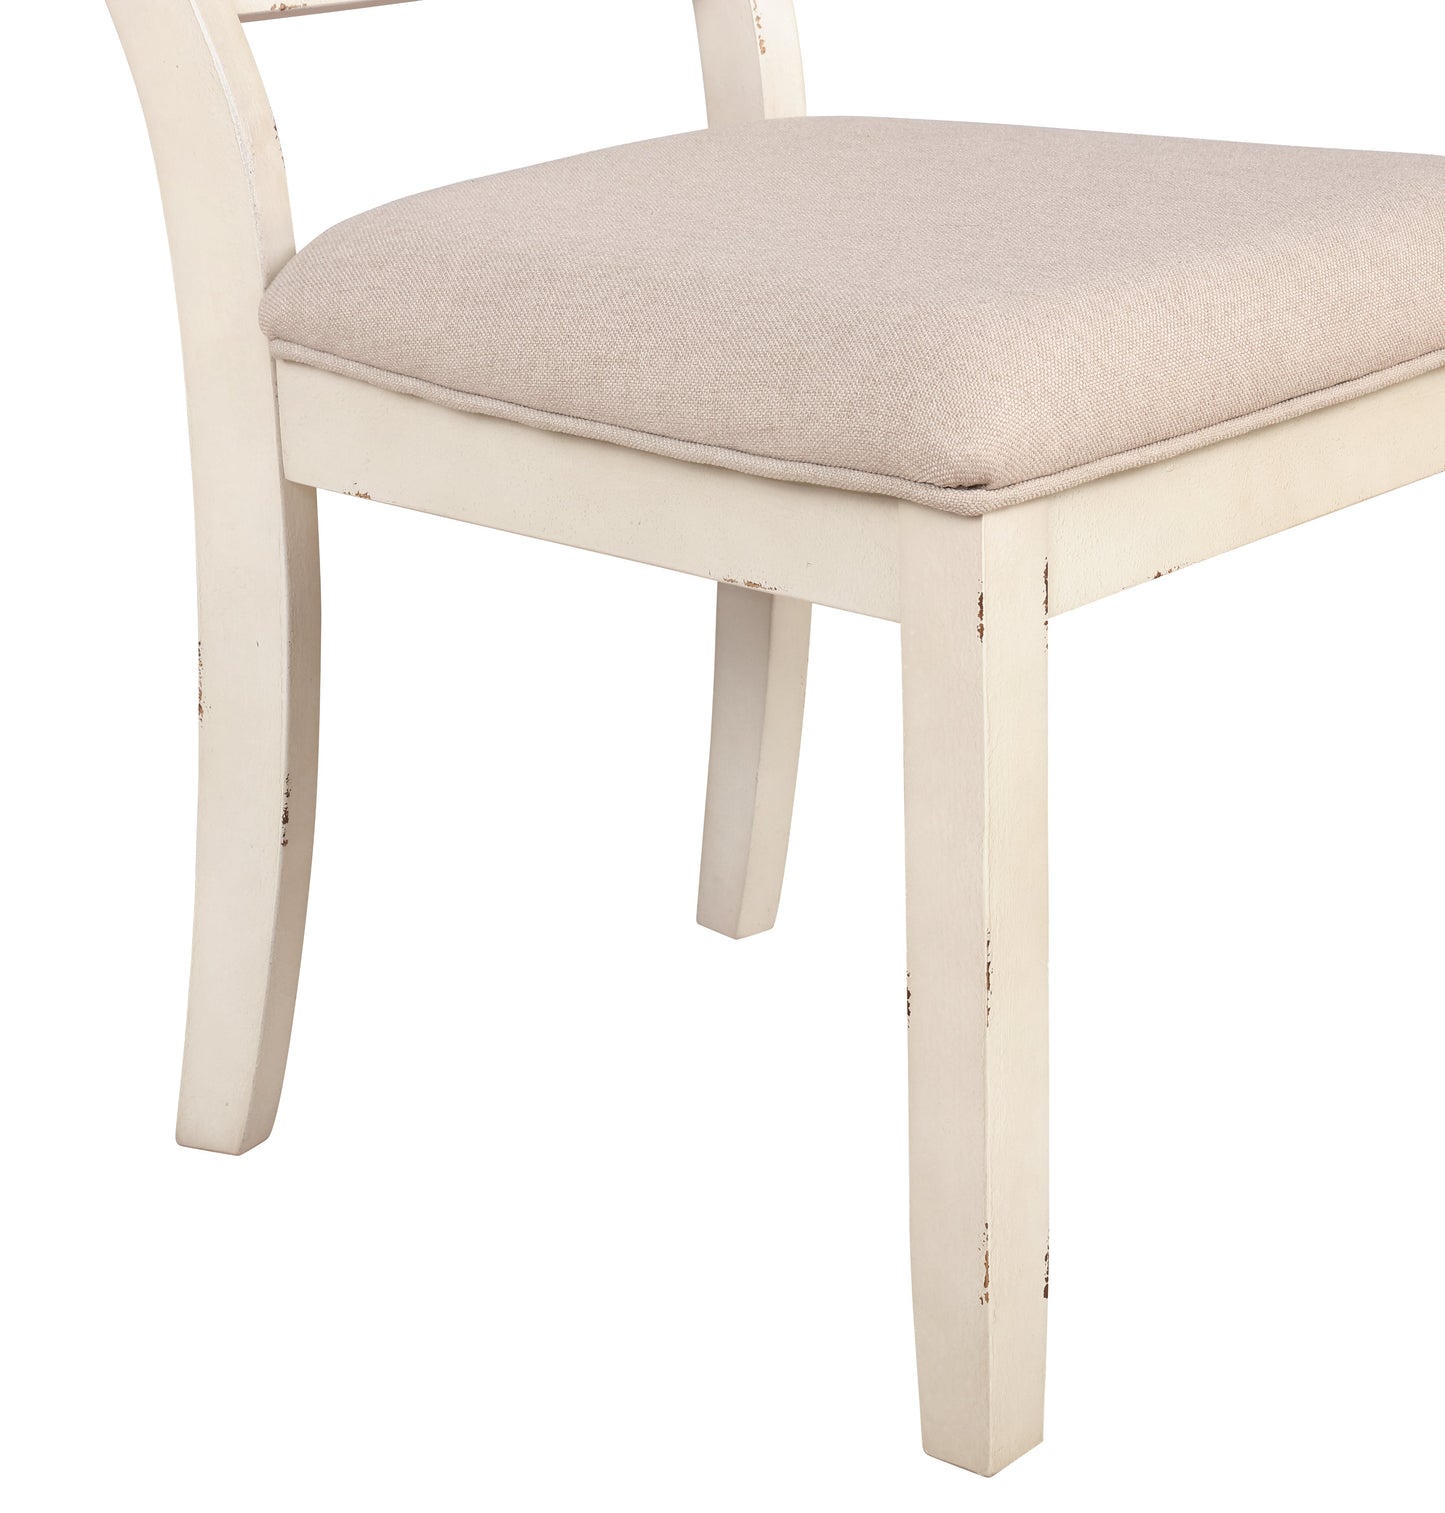 Prato Wood Cross Back Upholstered Dining Chairs, Set Of 2, Antique White